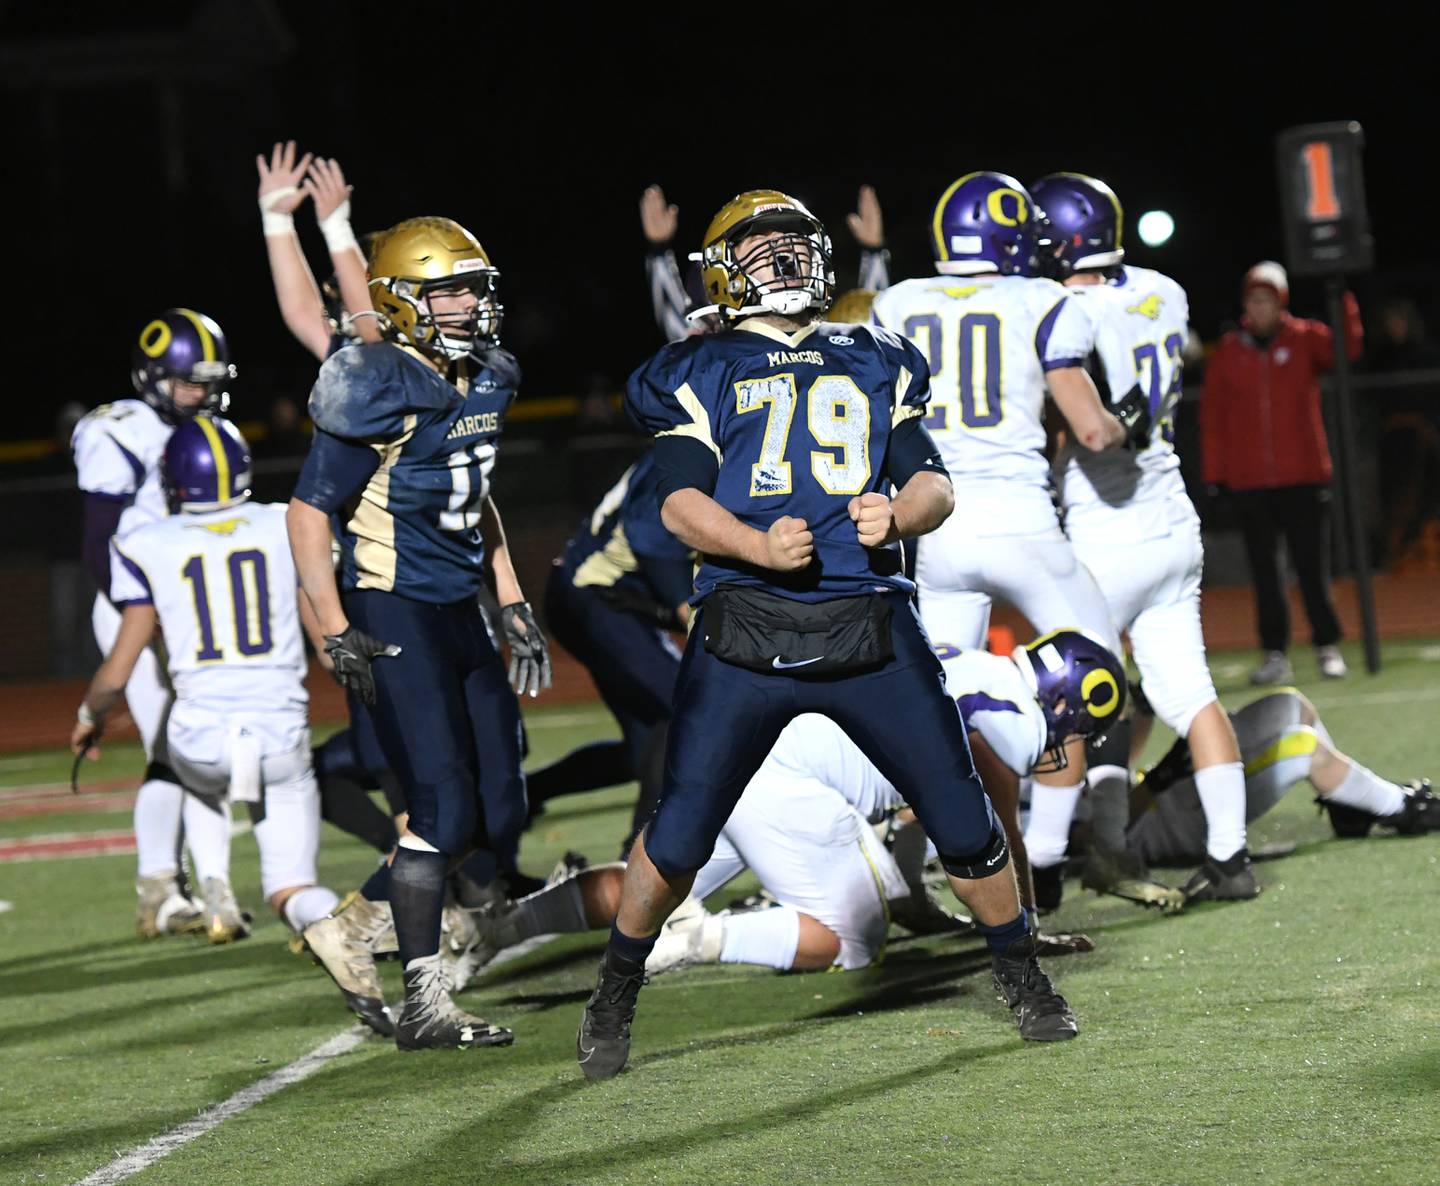 Polo's Cooper Blake celebratesa big defensive play for the Marcos in the fourth quarter at the 8-Man State Chapionship in Monmouth on Friday night. Polo beat Orangeville 12-7.